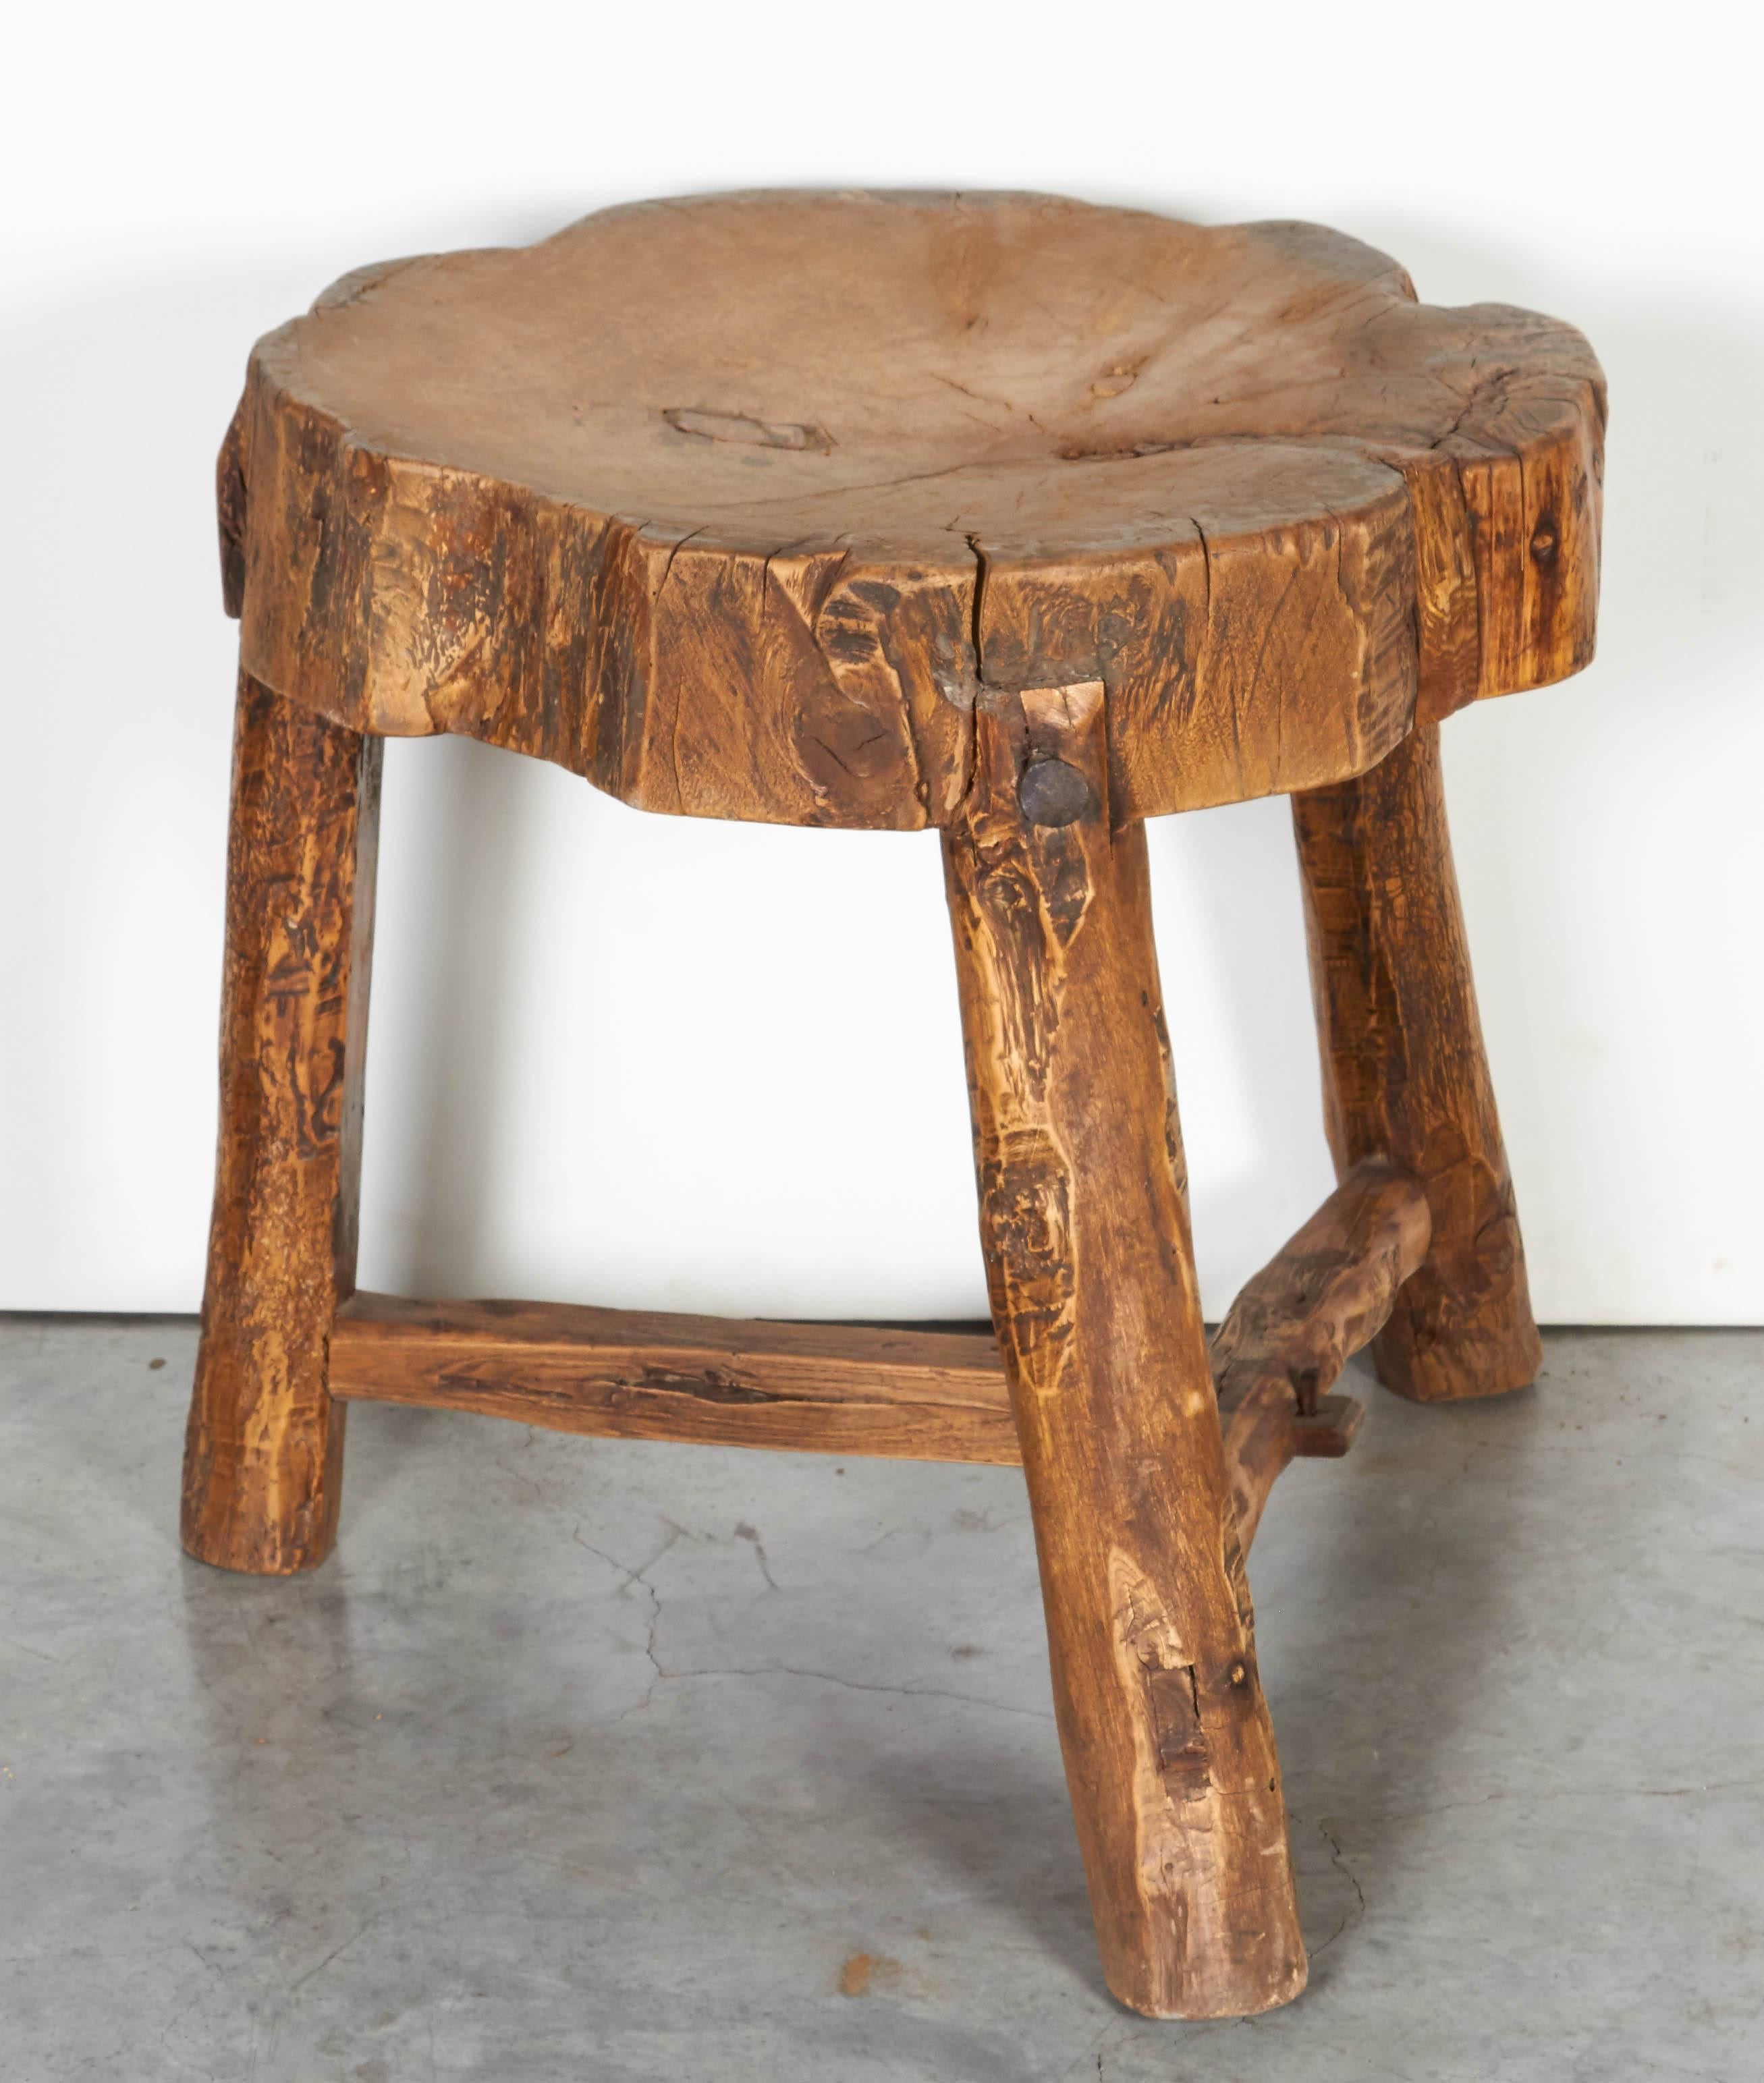 Chinese Organically Shaped Rustic Butcher Block Stool